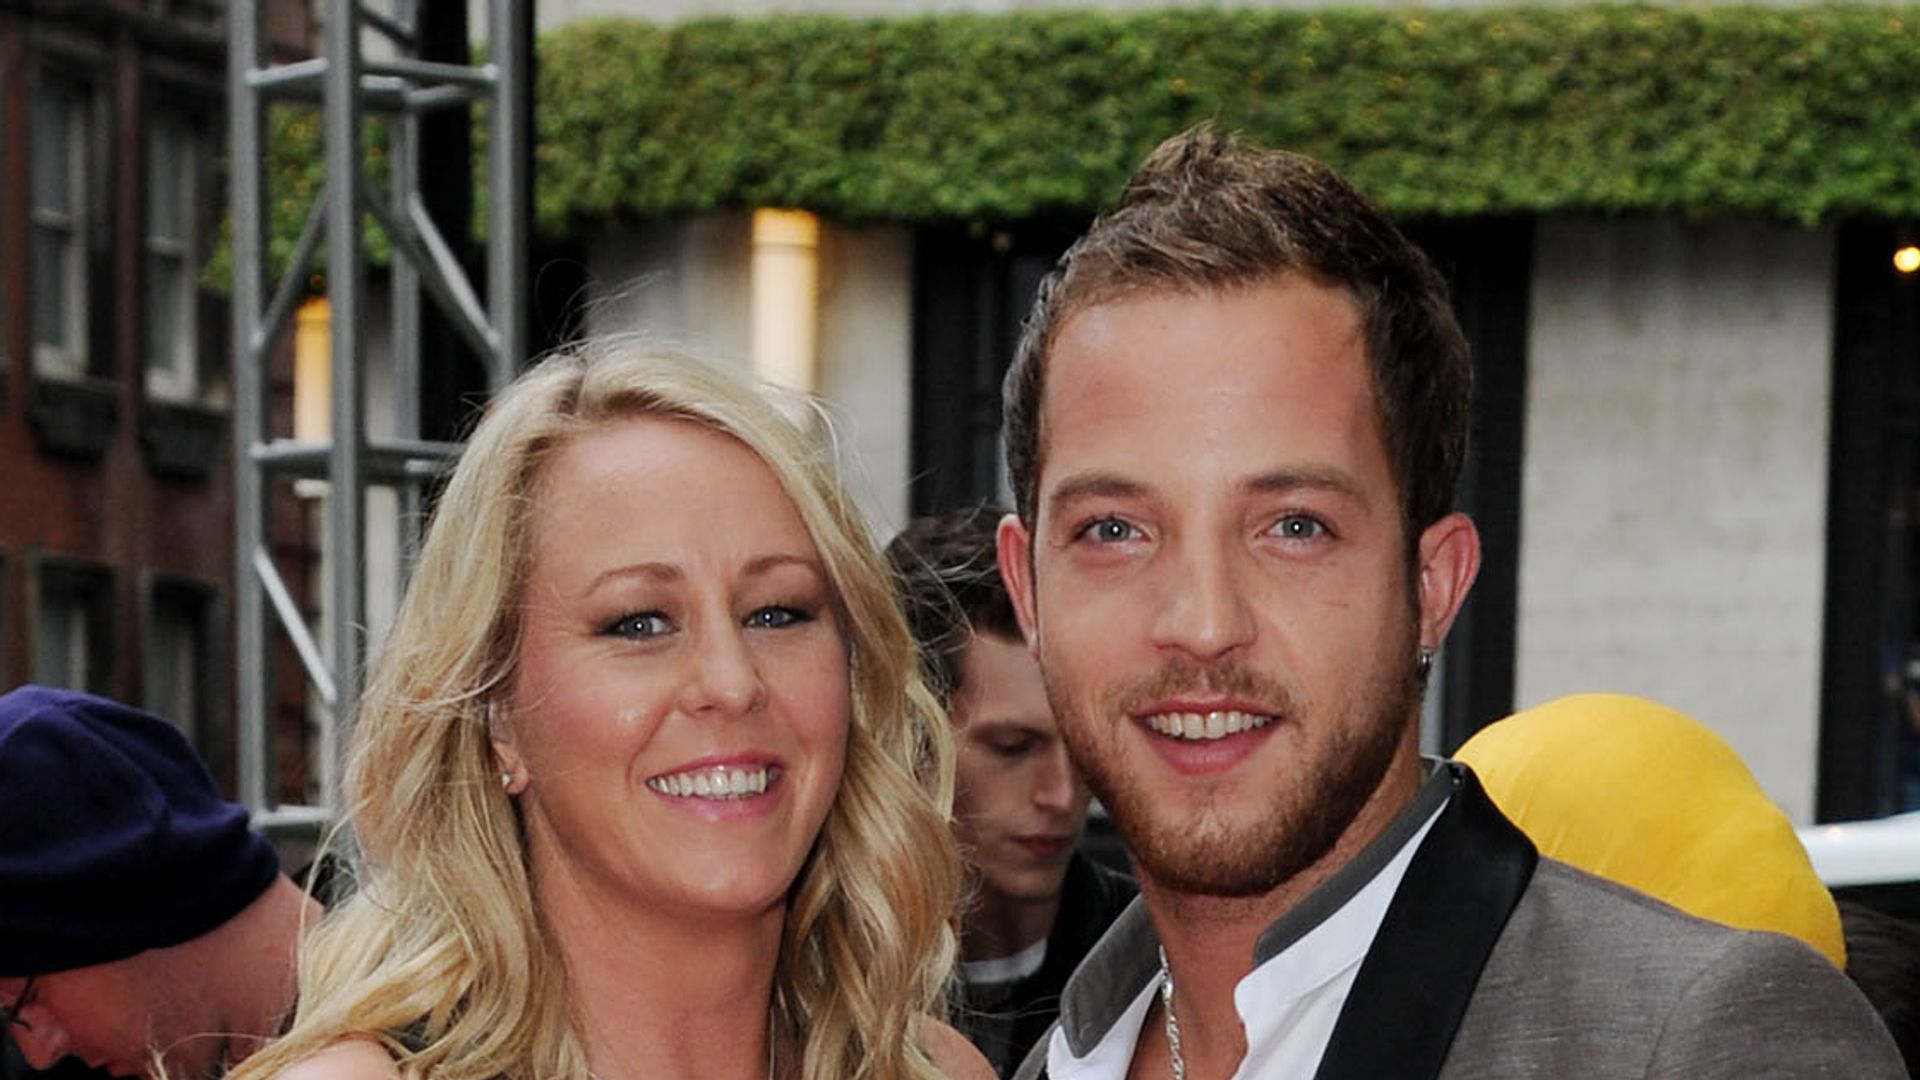 James Morrison and Gill Catchpole on the red carpet 